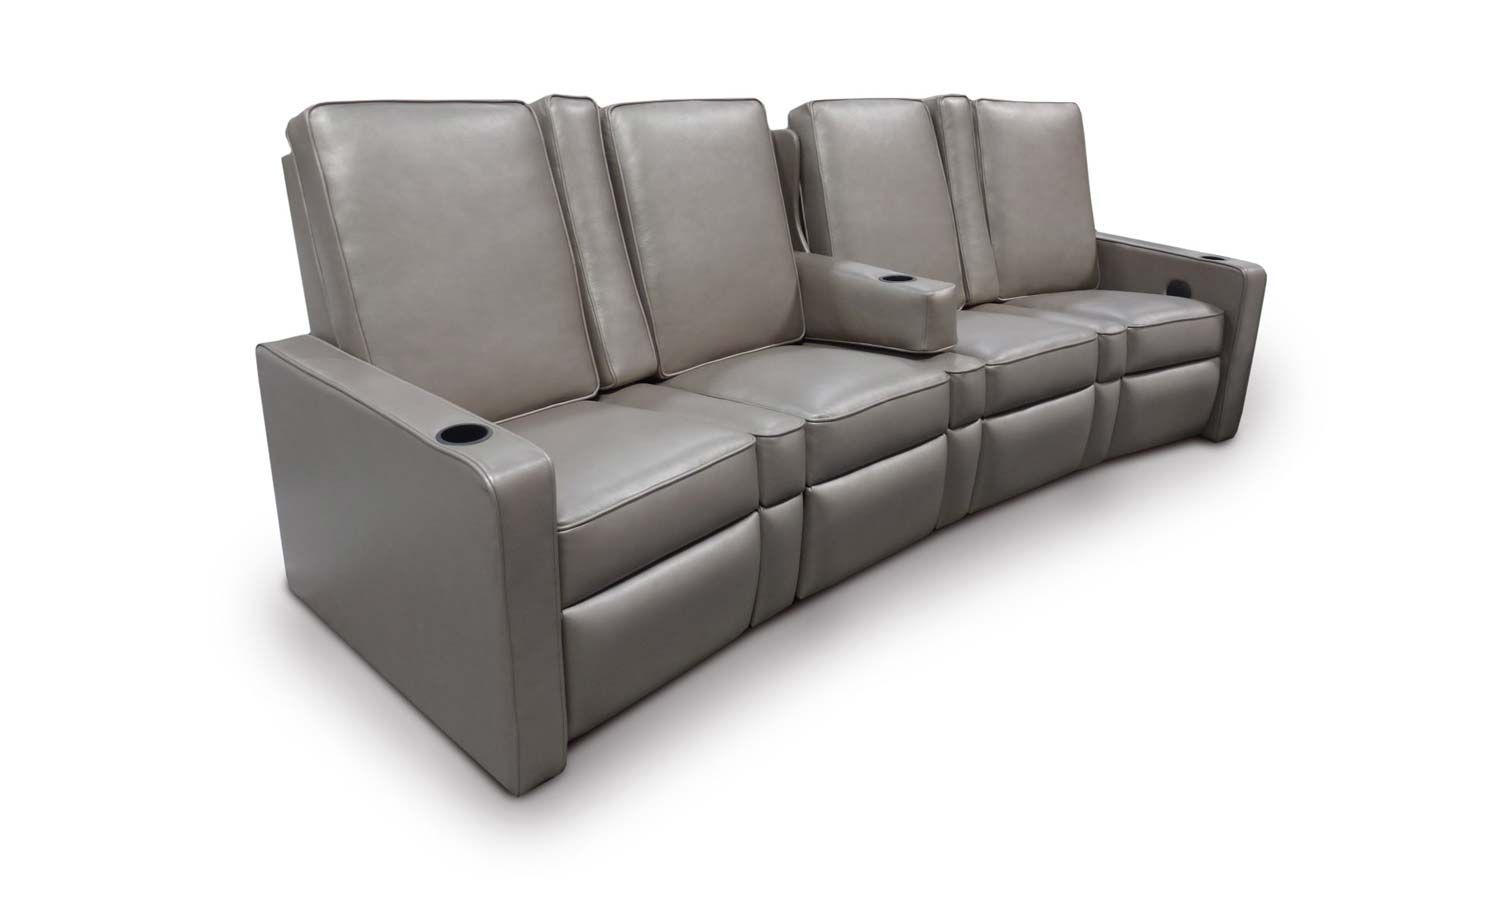 A grey leather couch